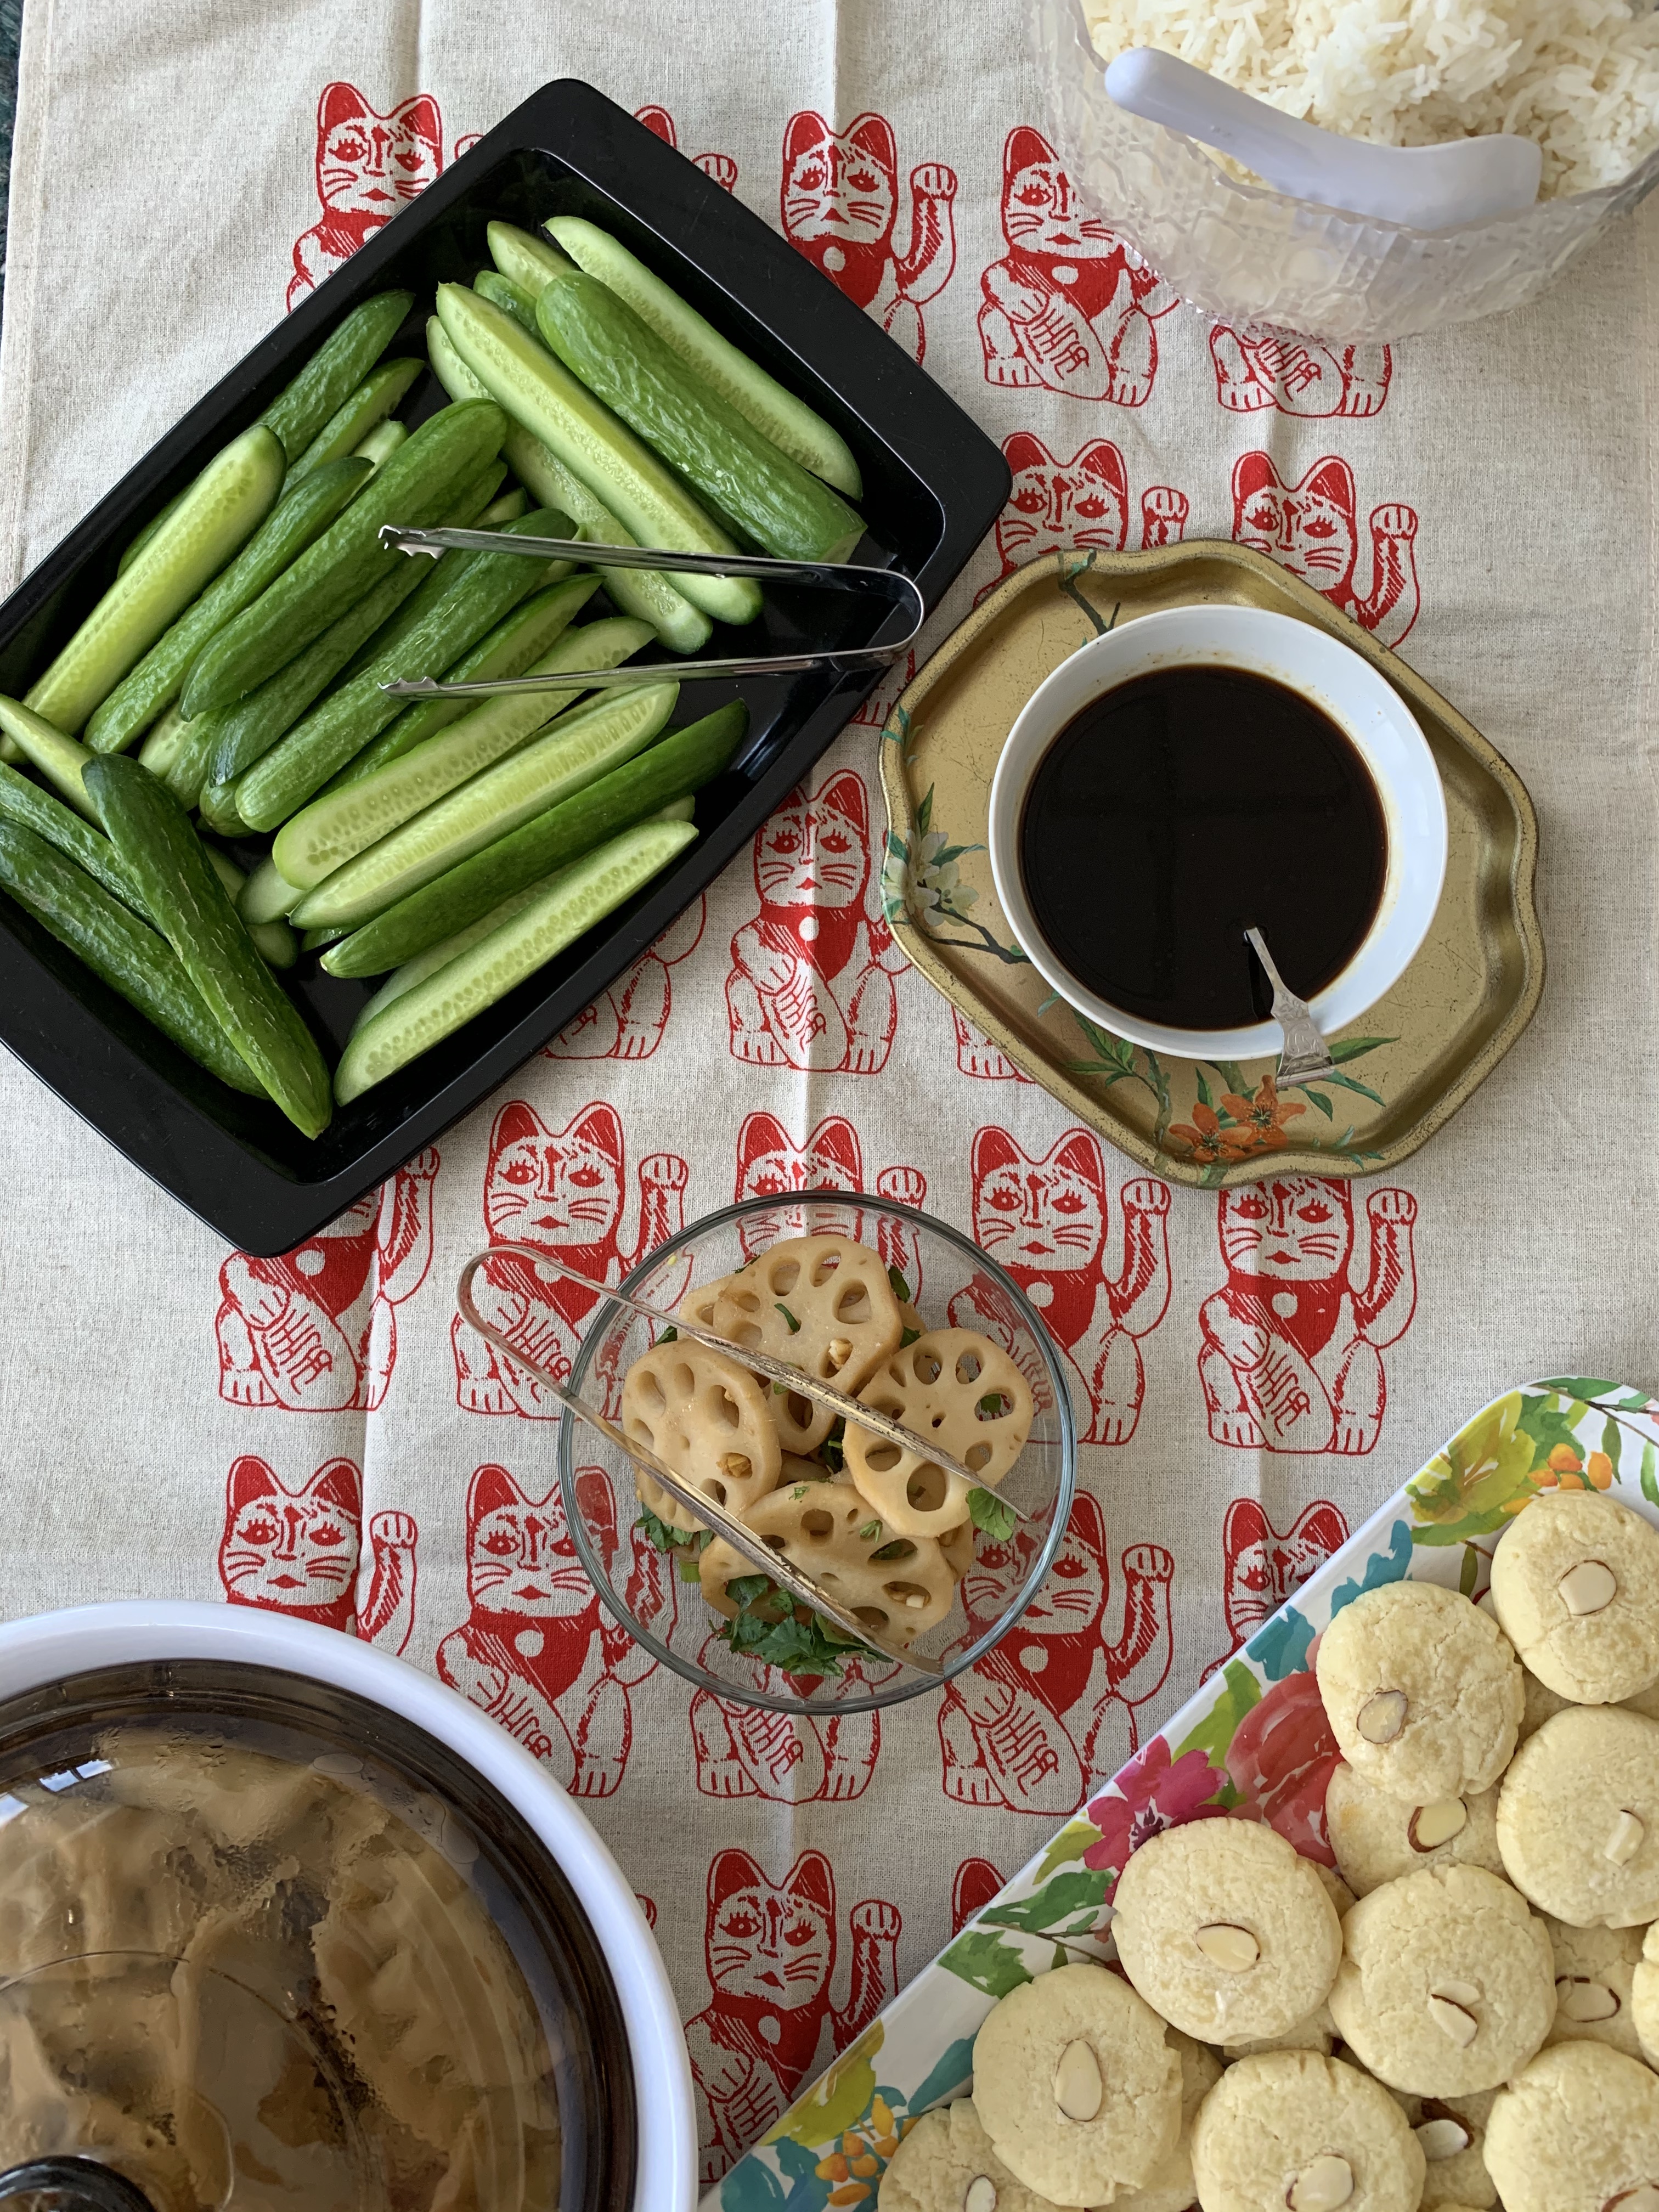 Image of cucumber slices, soy sauce, dumplings, lotus root, and almond cookies at a school party for Lunar New Year